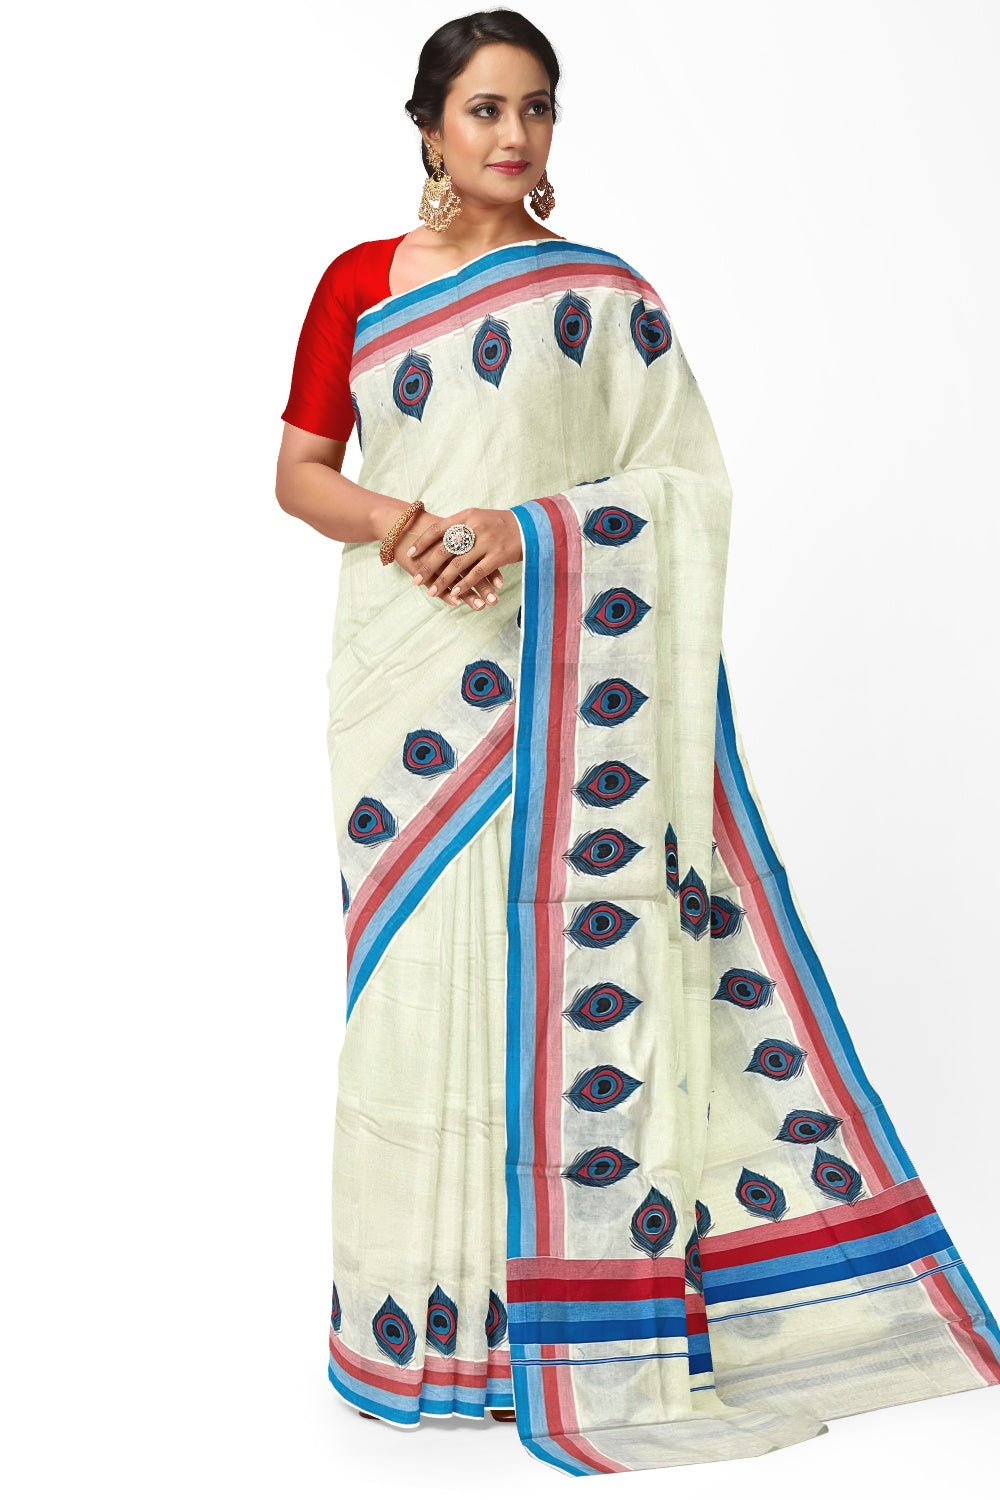 Kerala Cotton Saree with Blue Peacock Feather Mural Printed and Multi Colour Border